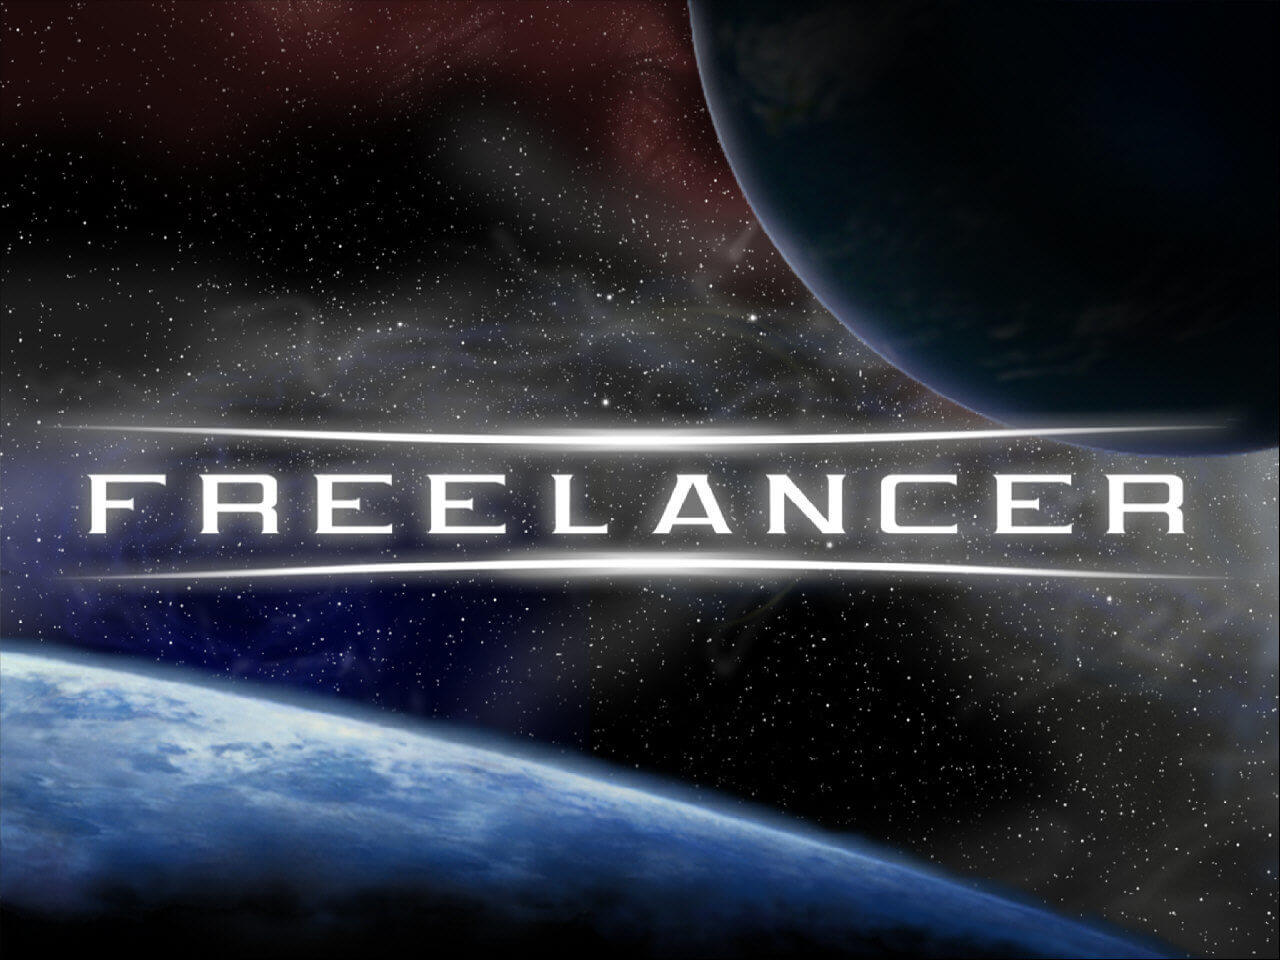 Discovery Freelancer turns the classic PC space game into an MMORPG